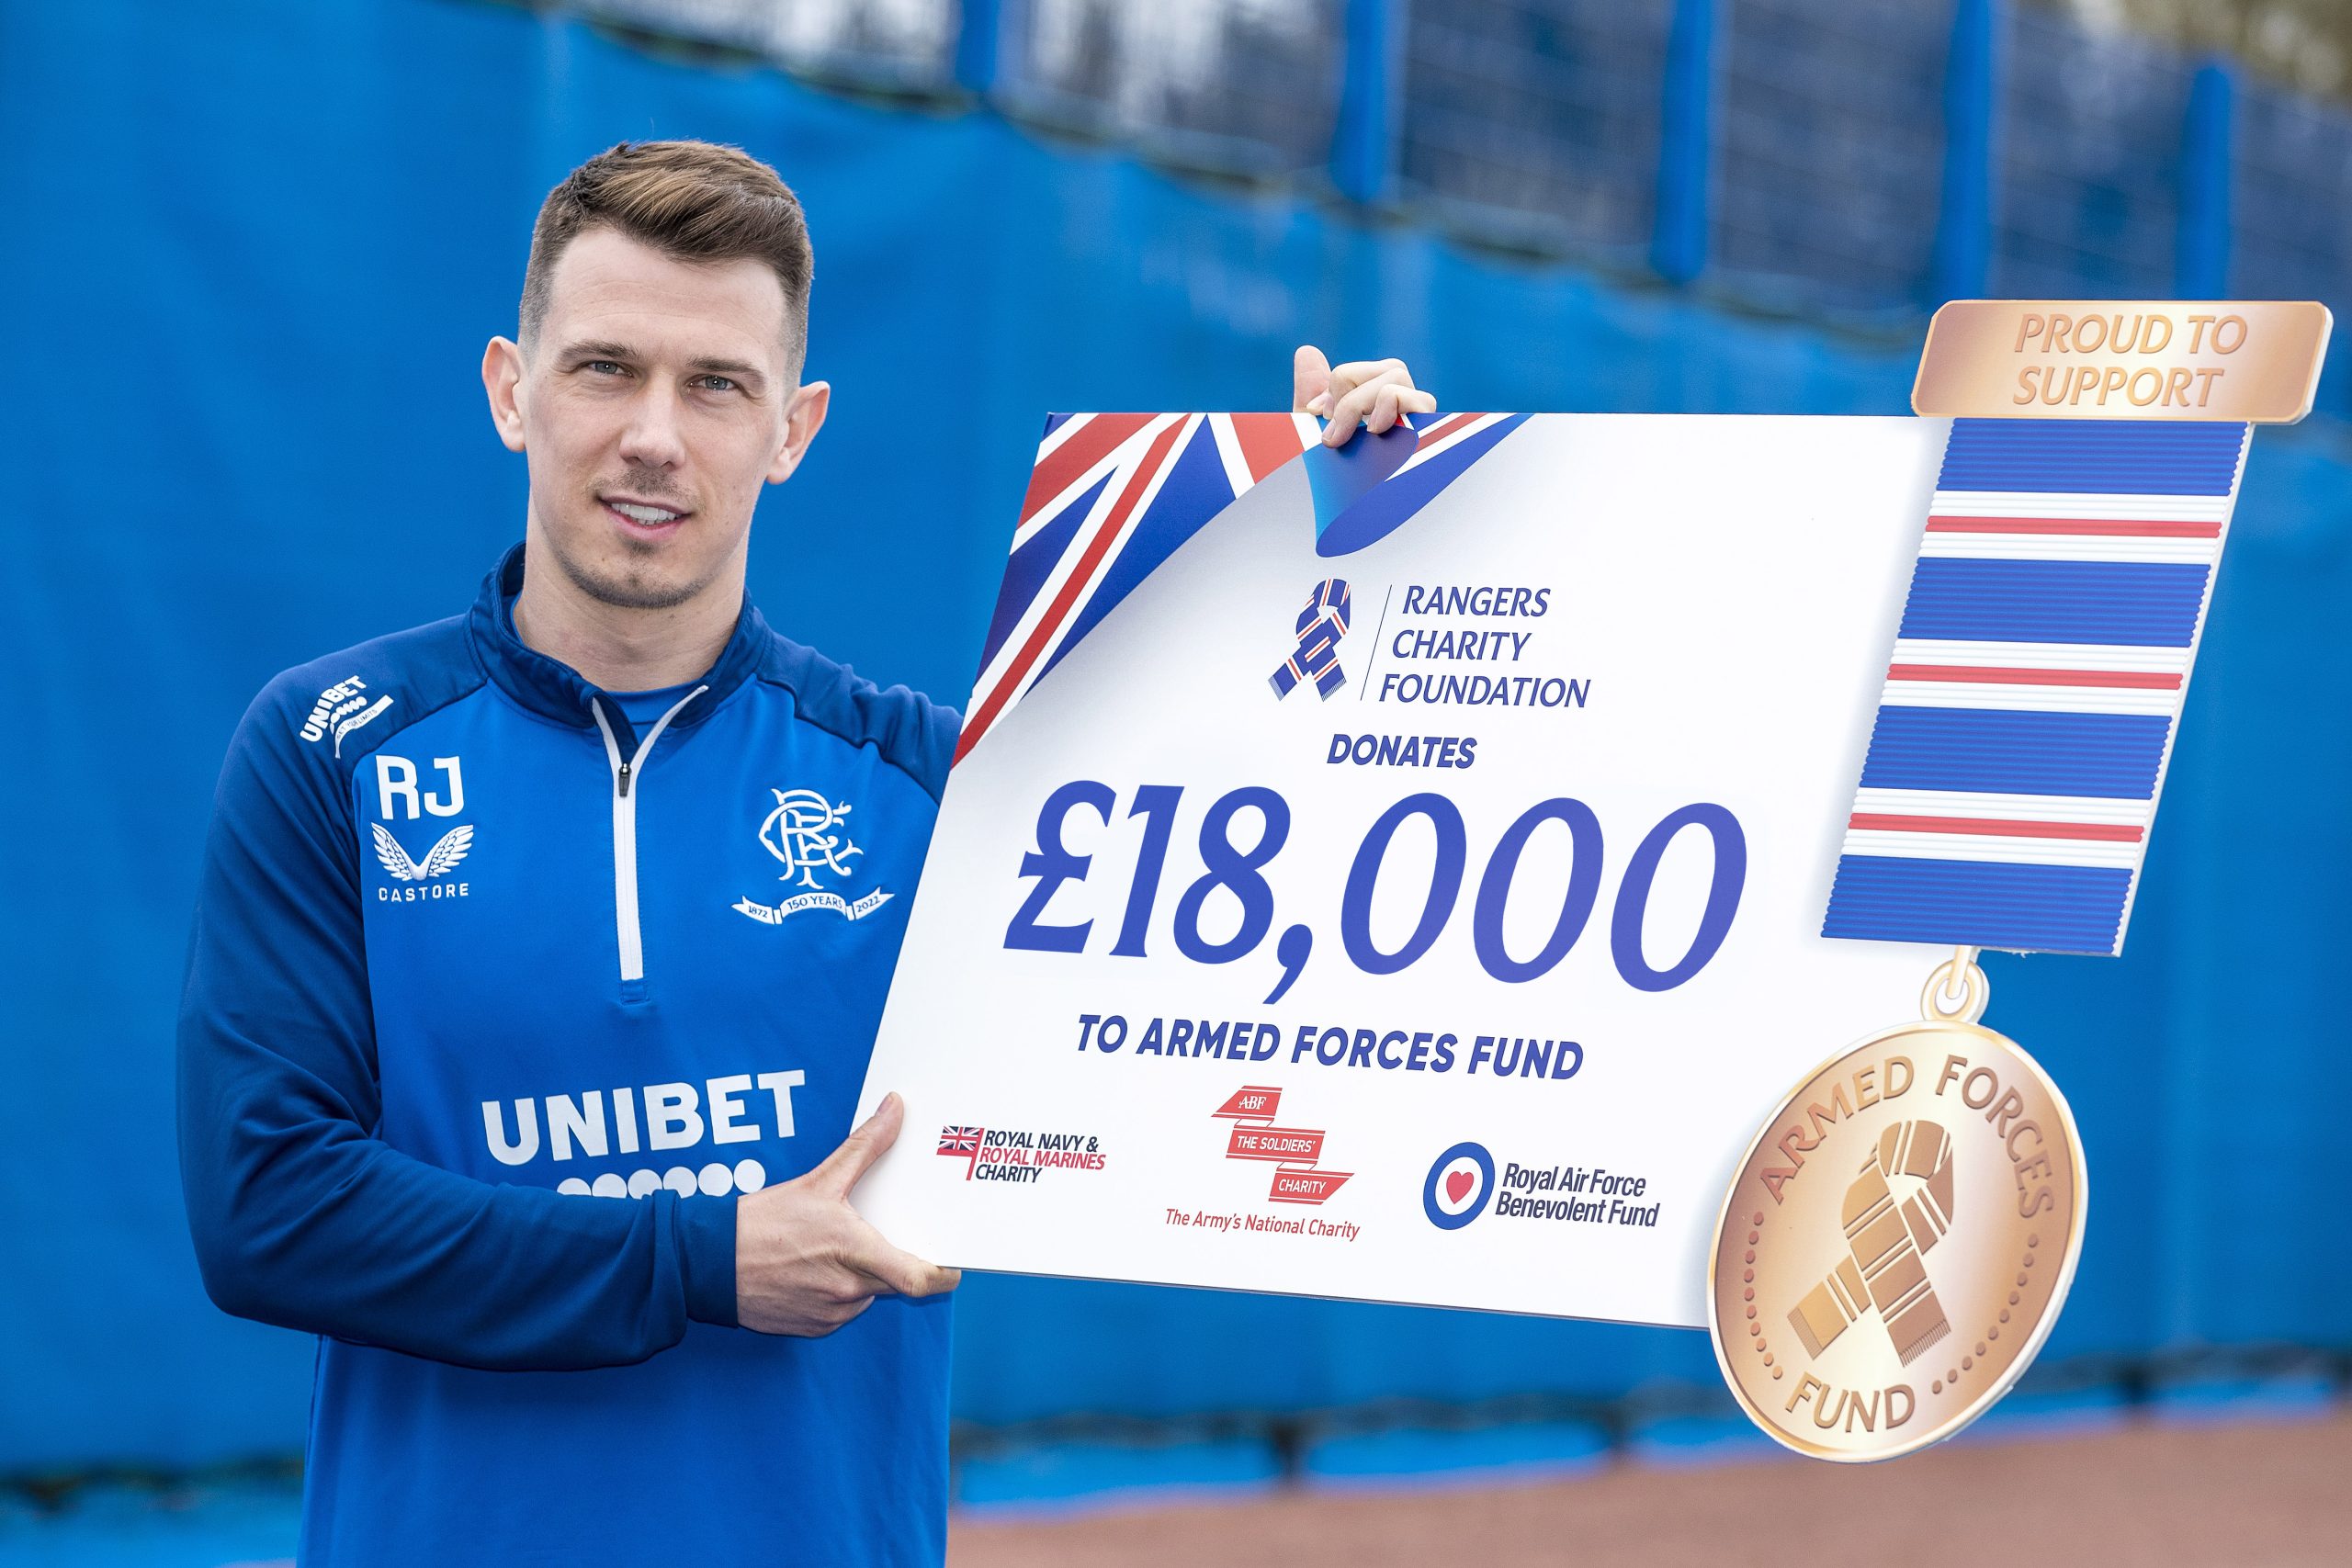 Midfielder Ryan Jack donates £18,000 to the Armed Forces Fund on behalf of The Rangers Charity Foundation.